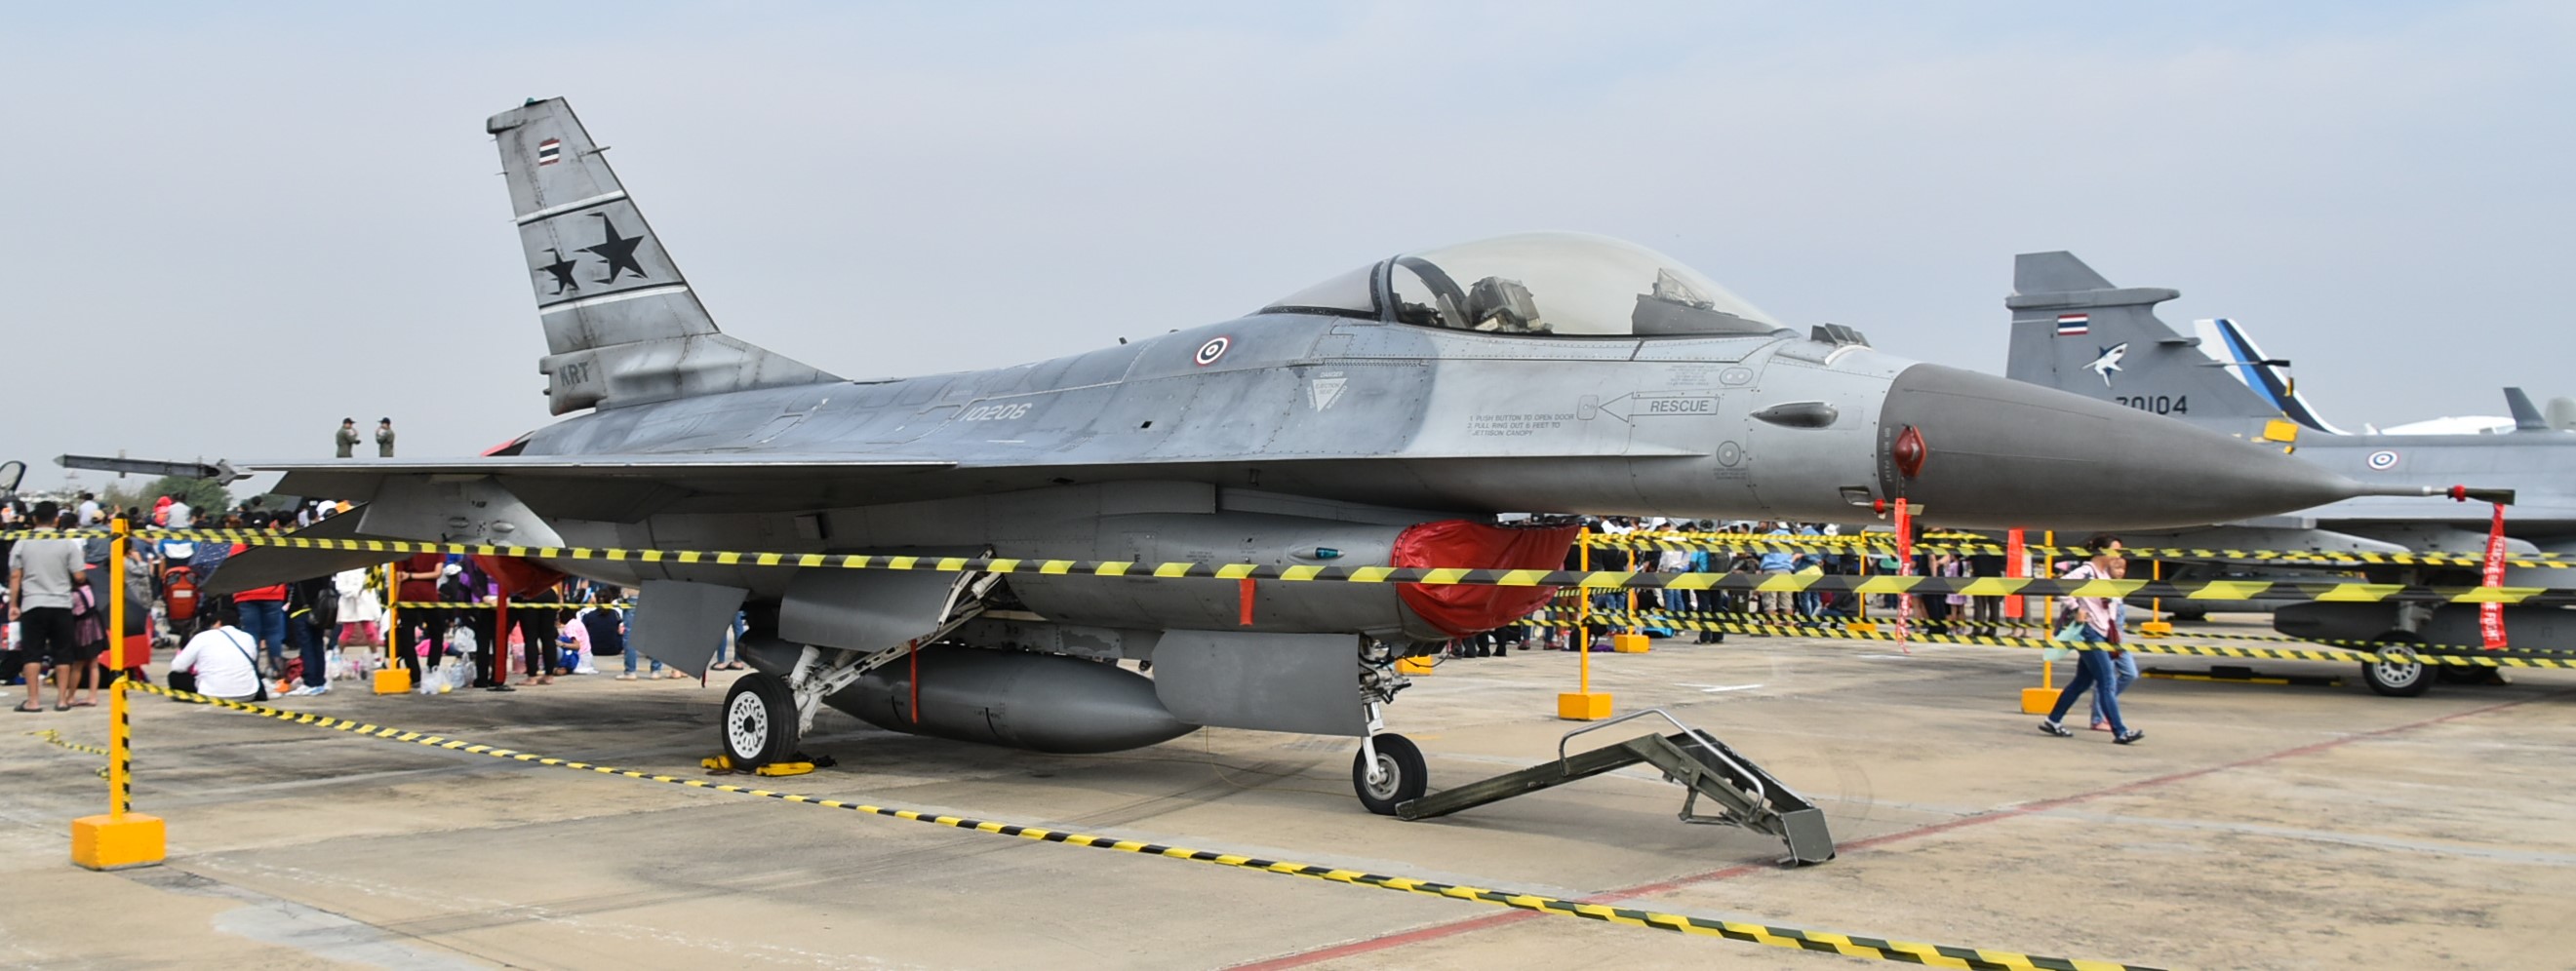 File:F-16 of the Royal Thai Air Force (26014441198).jpg - Wikimedia Commons